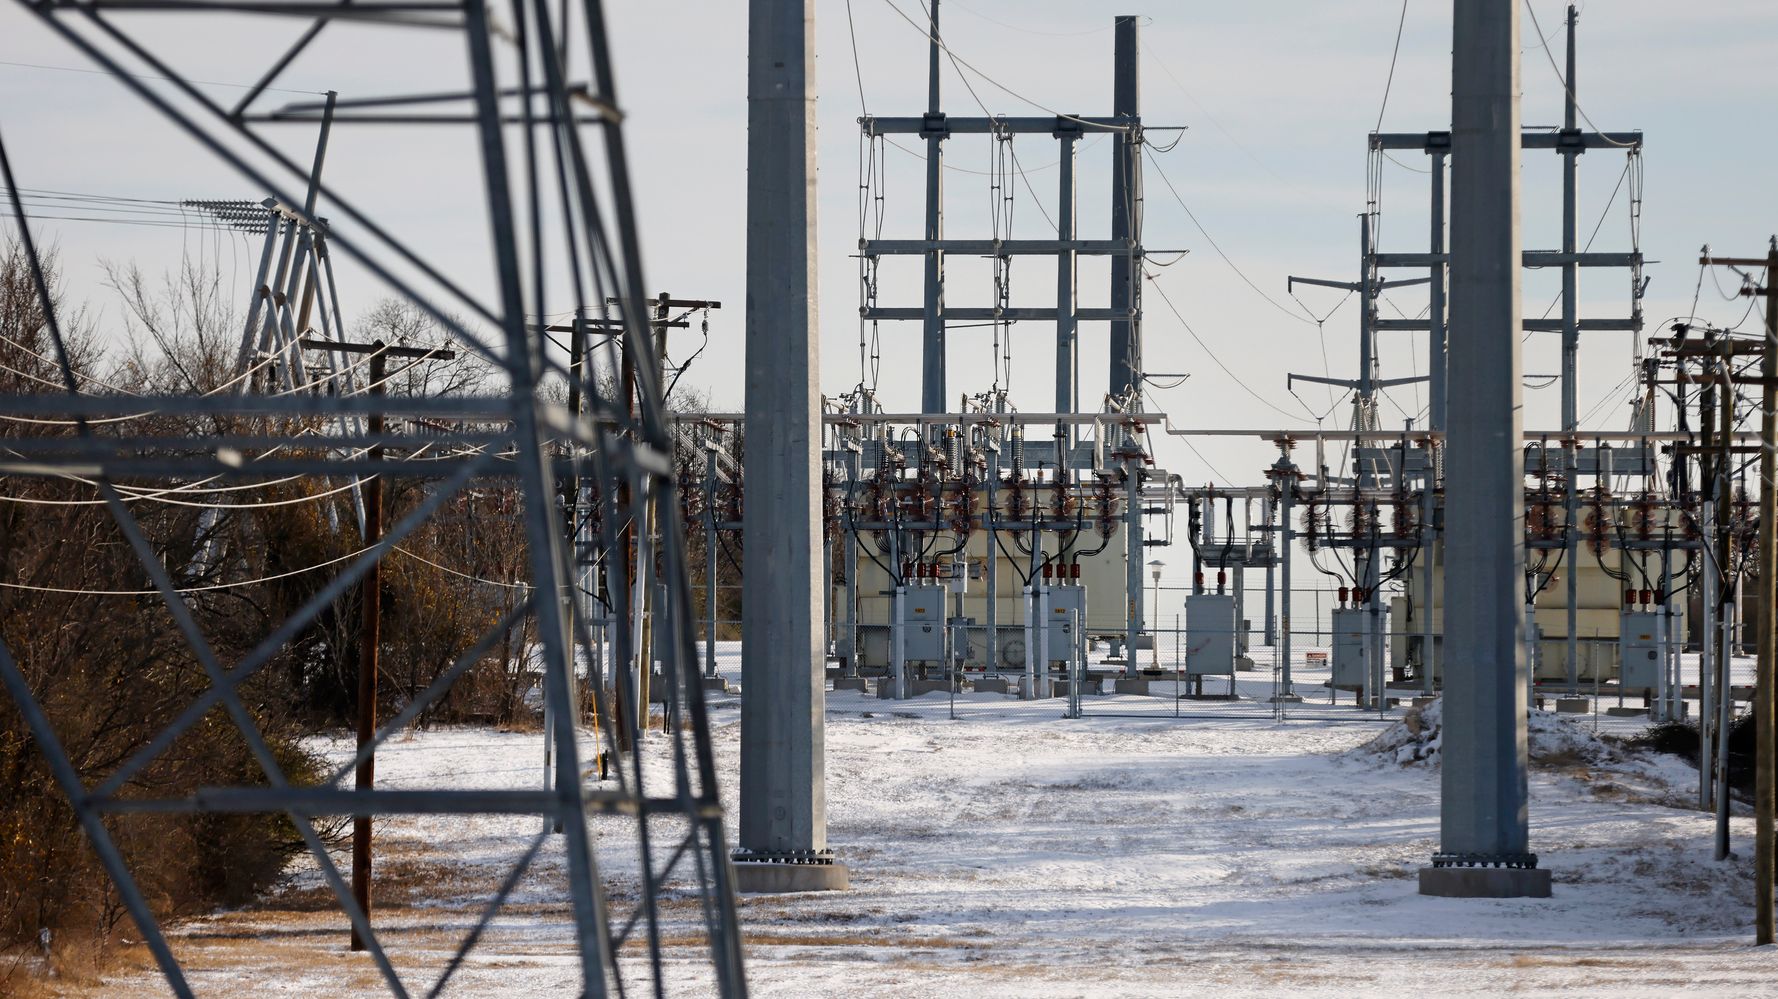 Why a powerful winter storm caused Blackouts in Texas